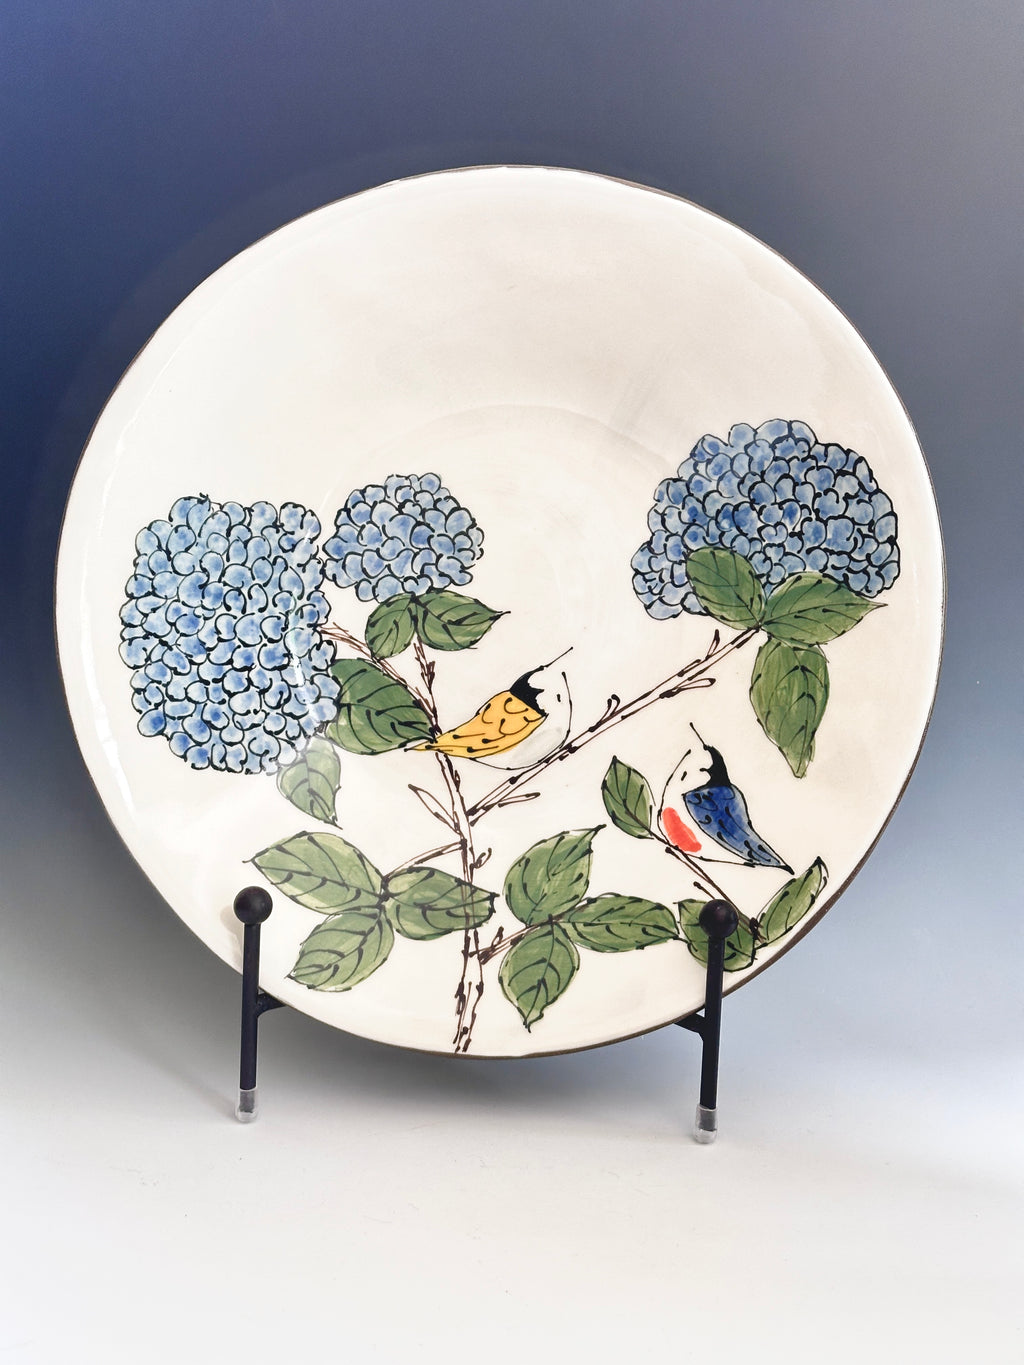 Large Hand Painted Serving Bowl